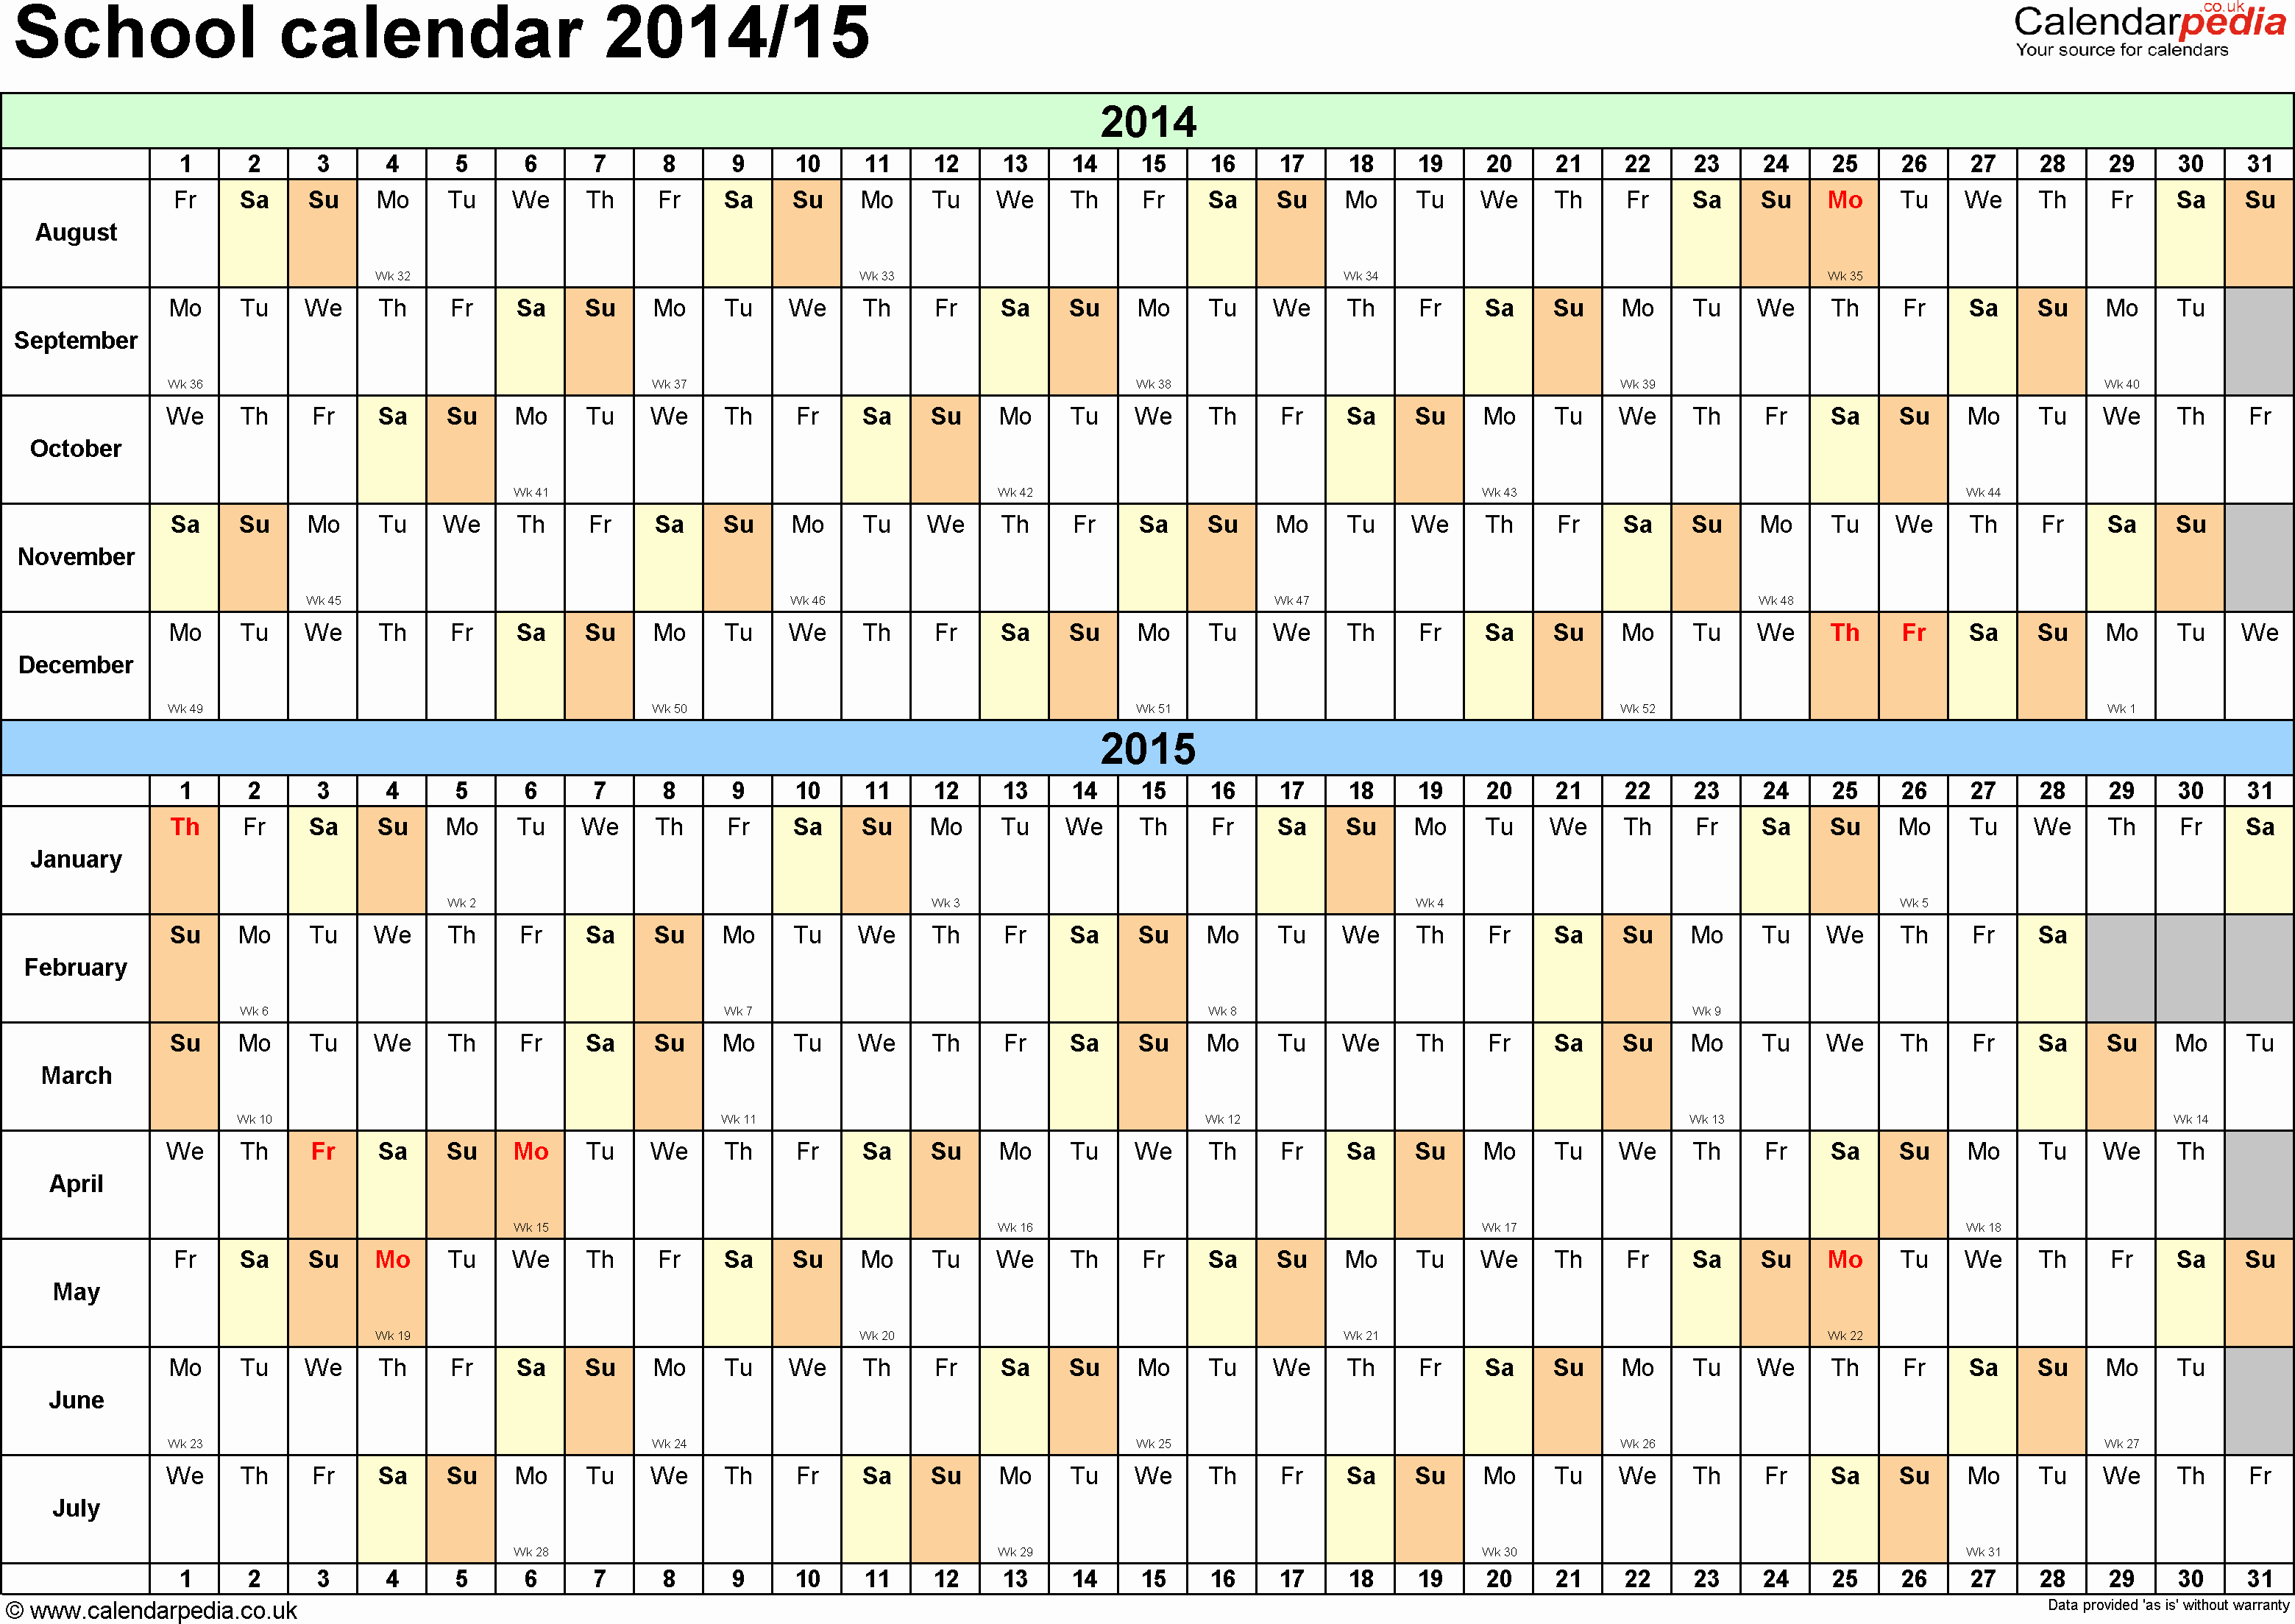 Free Yearly Calendar Templates 2015 Lovely Year Planner 2015 Excel Free Download School Calendars